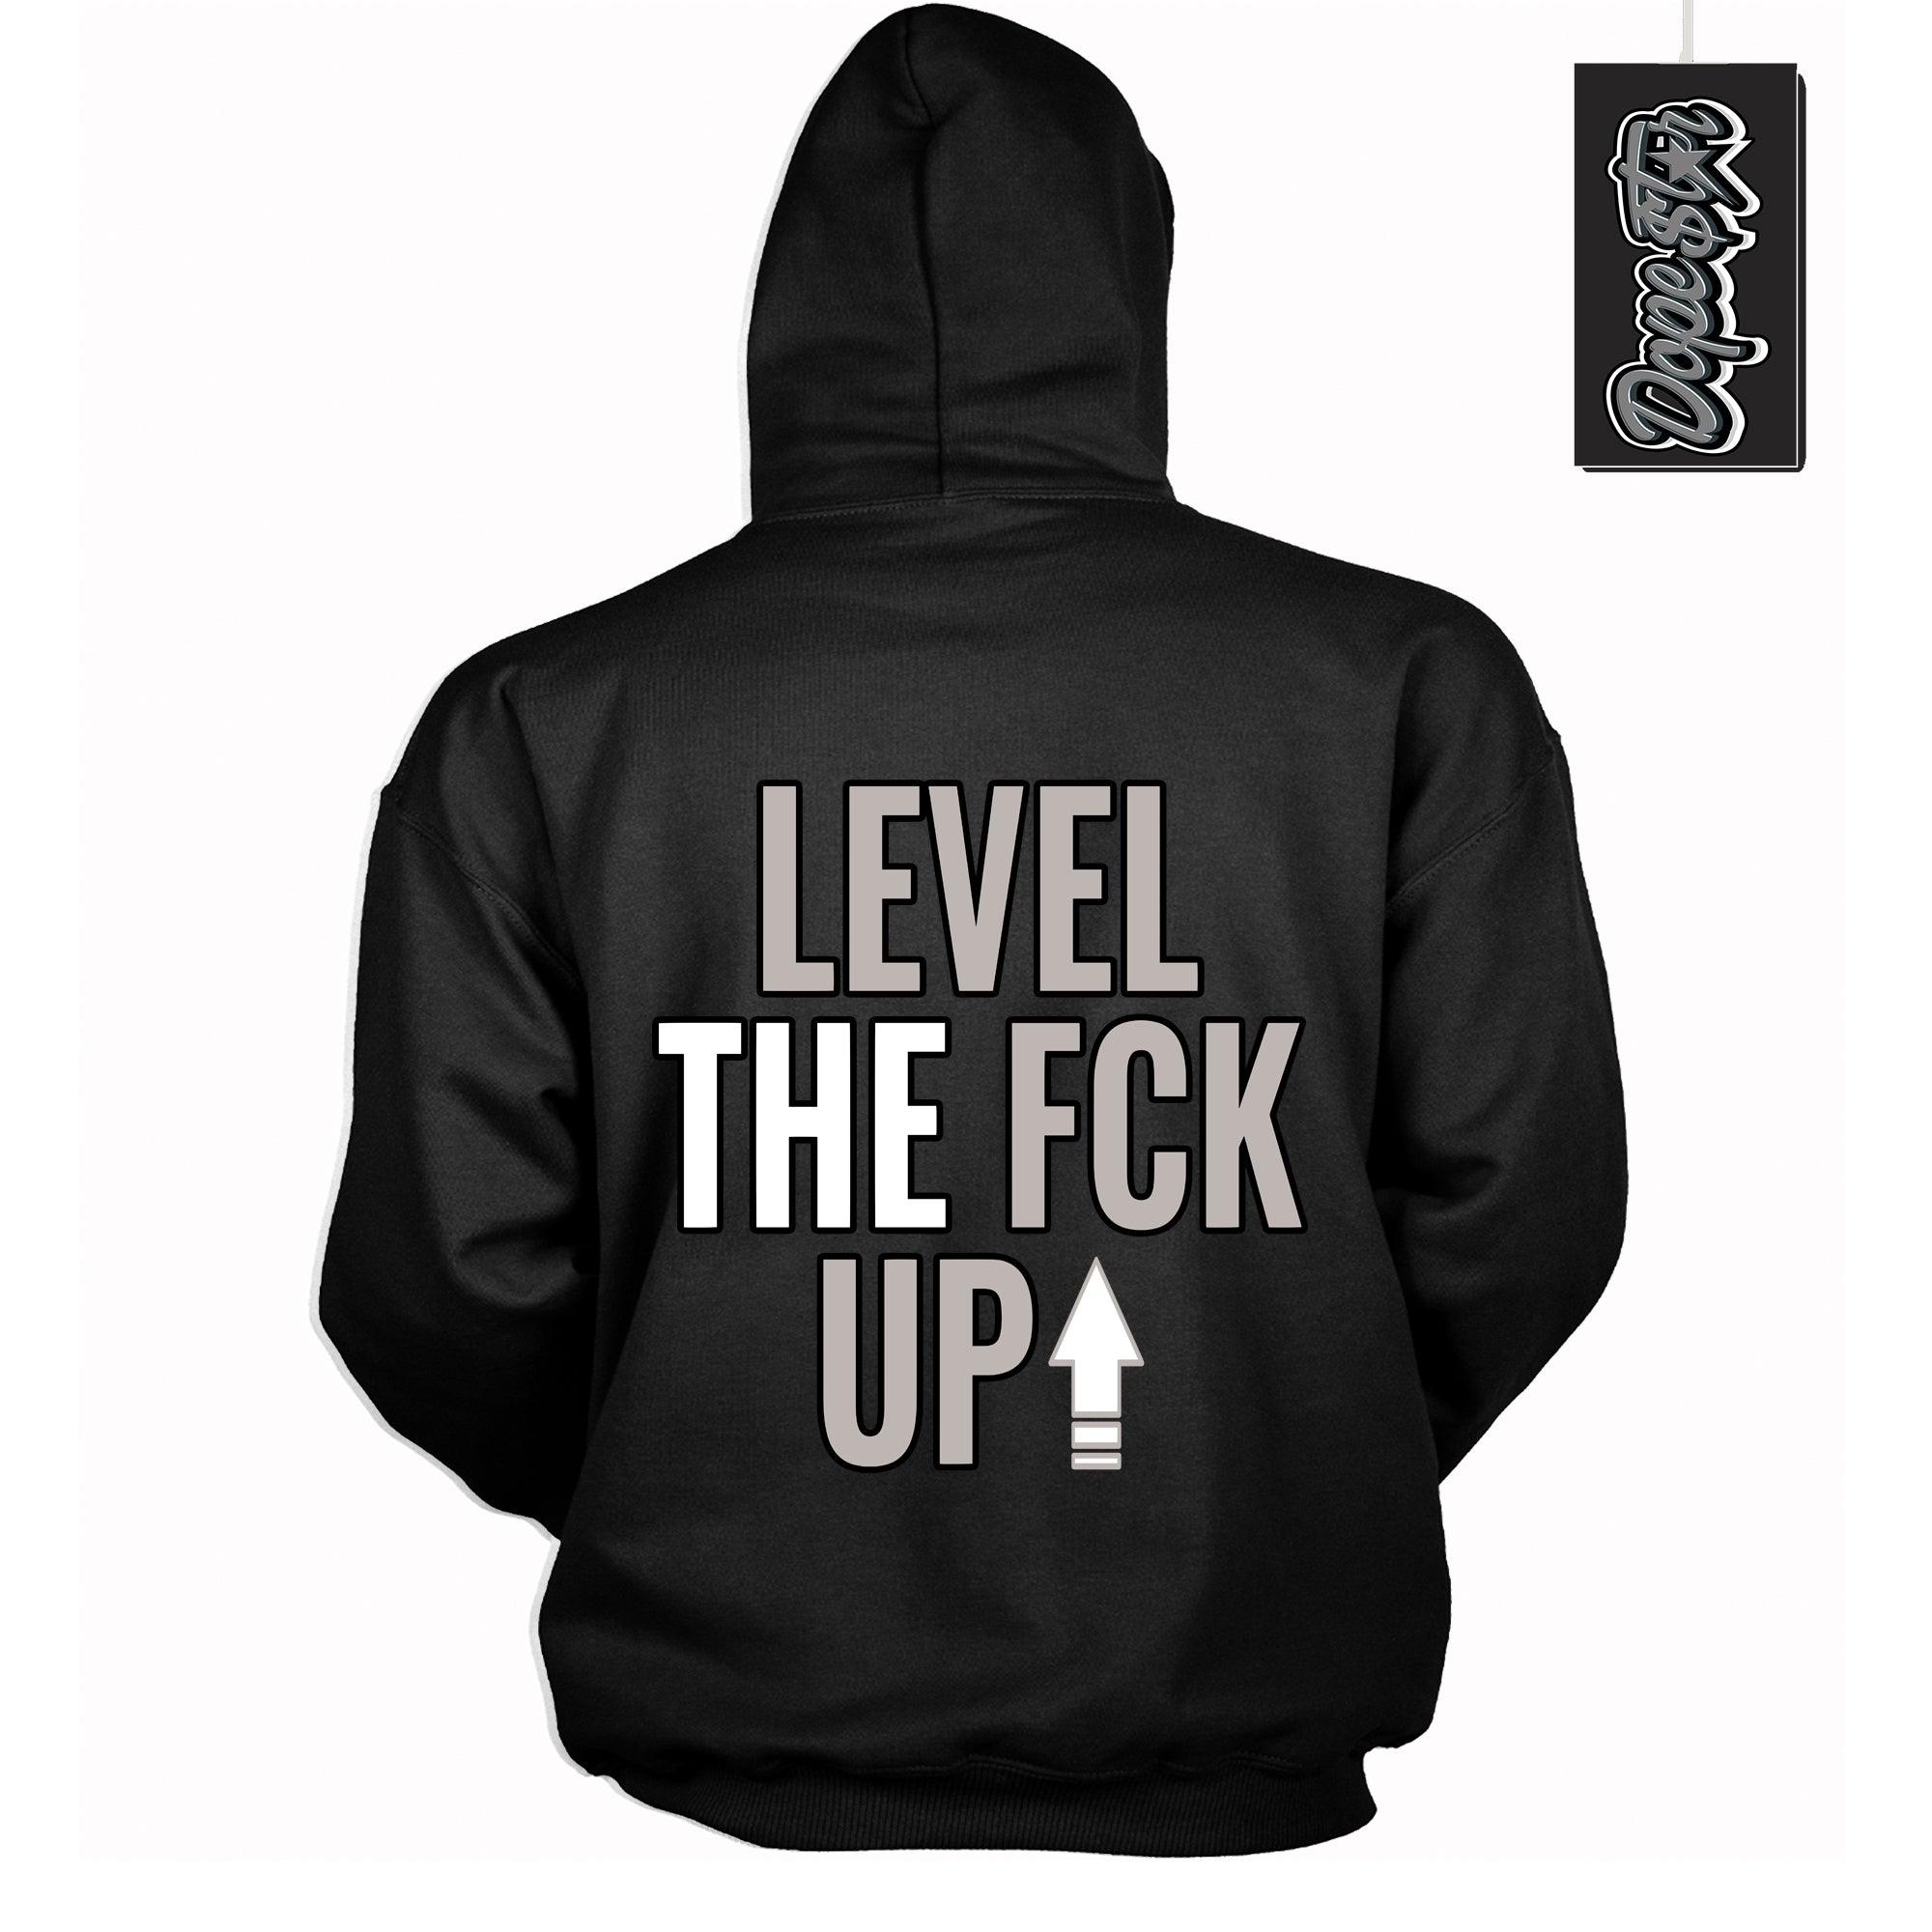 Cool Black Hoodie With Level Up design That Perfectly Matches AIR JORDAN 4 RETRO MILITARY BLACK Sneakers